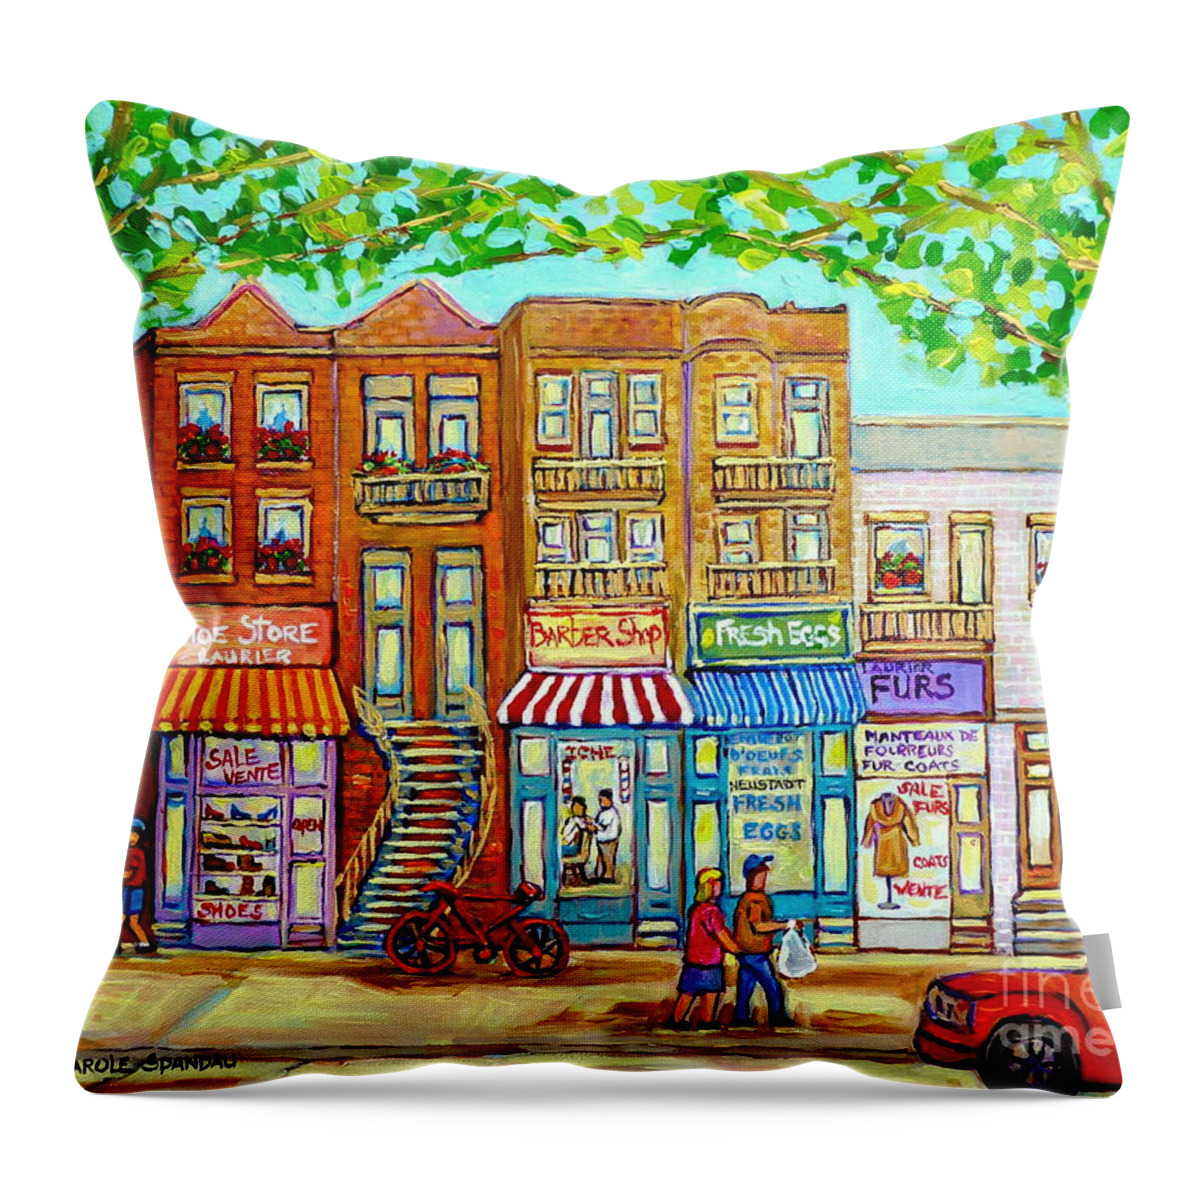 Montreal Throw Pillow featuring the painting Laurier Street Circa 1960 Montreal Memories Vintage Store Fronts Apartments Family Life Canadian Art by Carole Spandau